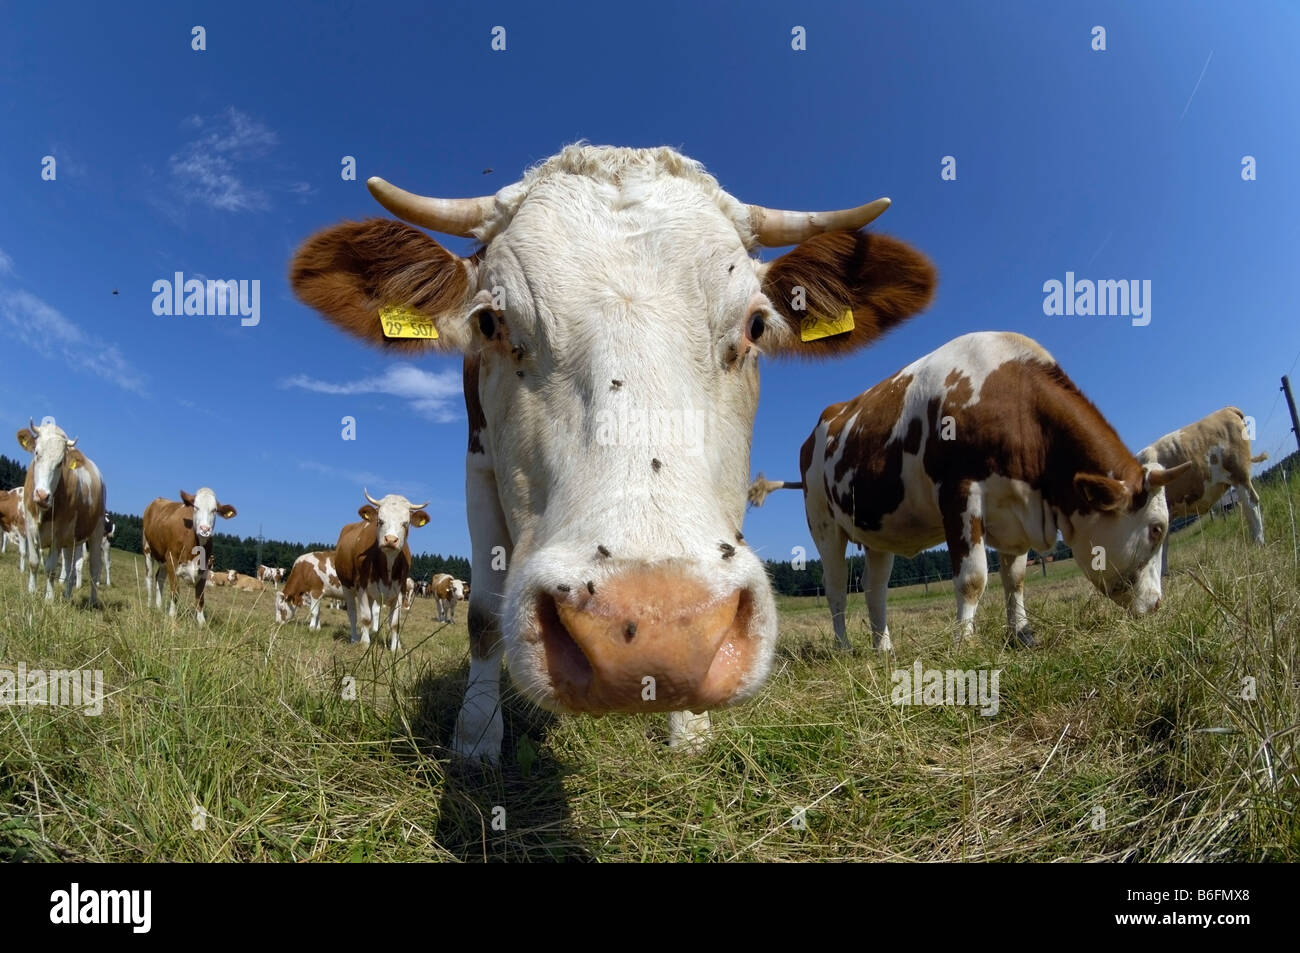 Cows on a pasture, cow looking into the camera, wide-angle view, Upper Bavaria, Germany, Europe Stock Photo